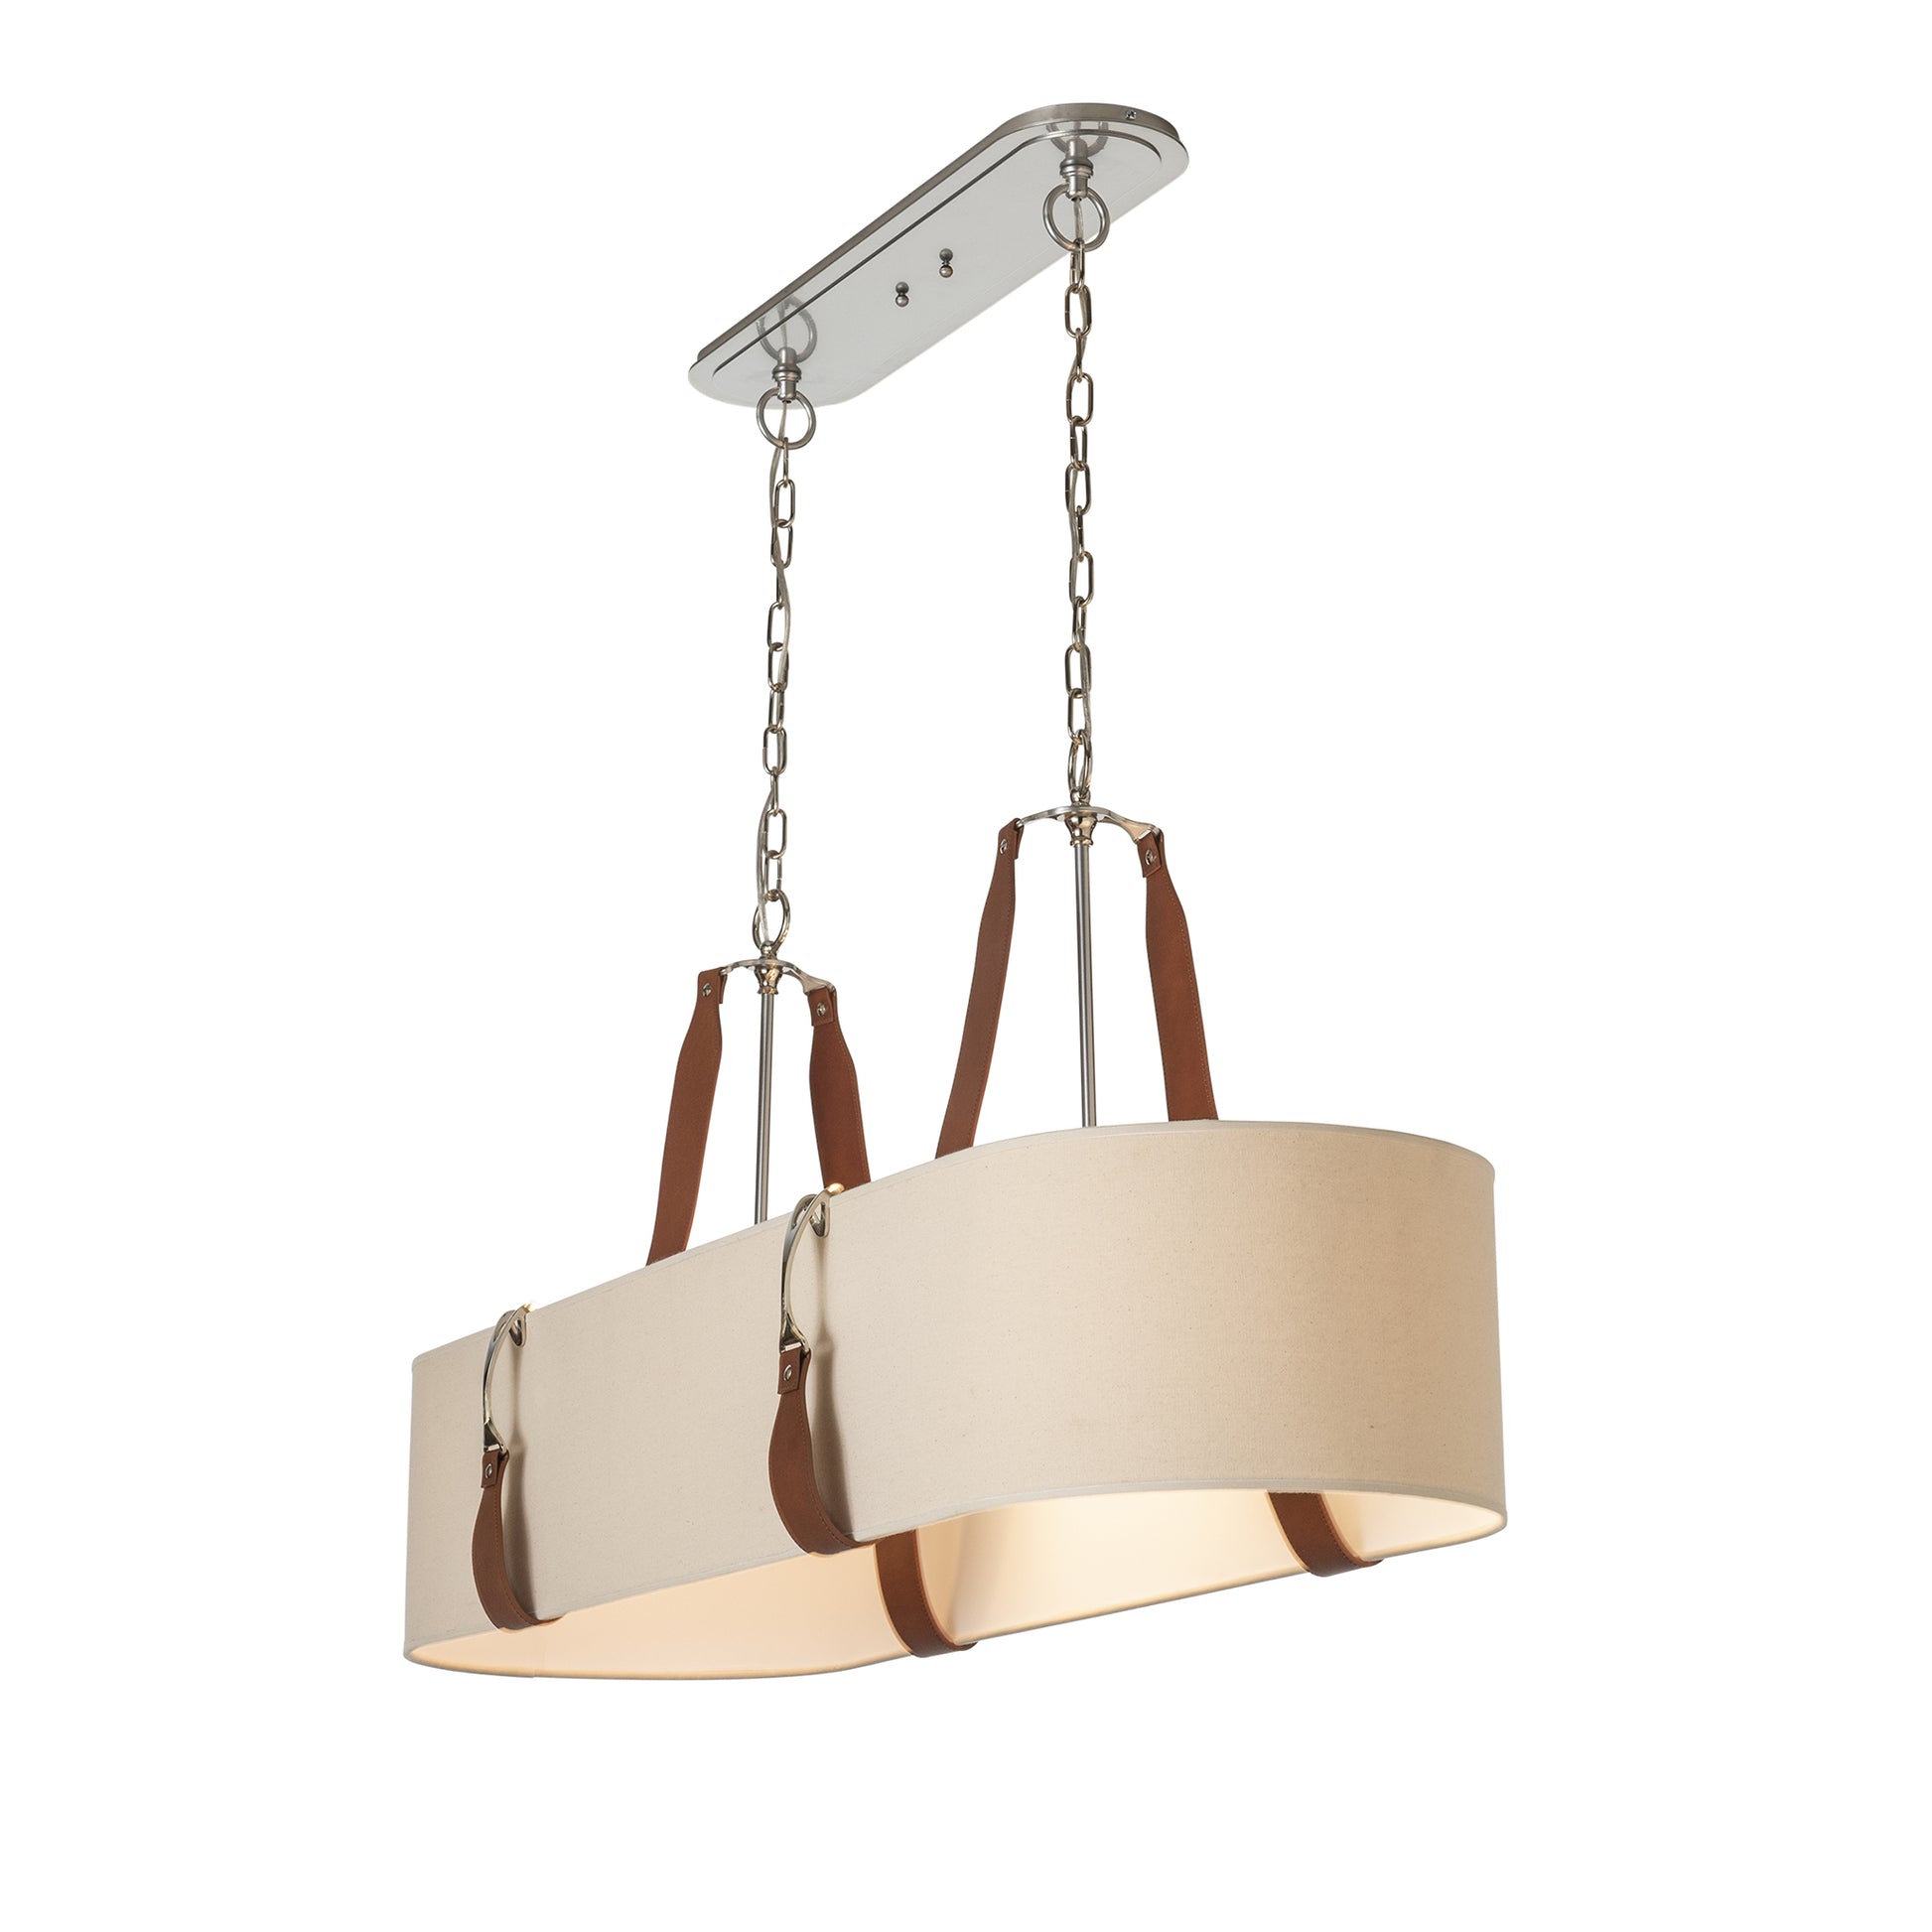 A modern chandelier with a sleek, cream-colored shade and elegant brown leather equestrian straps, hanging from a polished silver base and chain in a simple, stylized room setting. The Saratoga Oval Pendant by Hubbardton Forge.